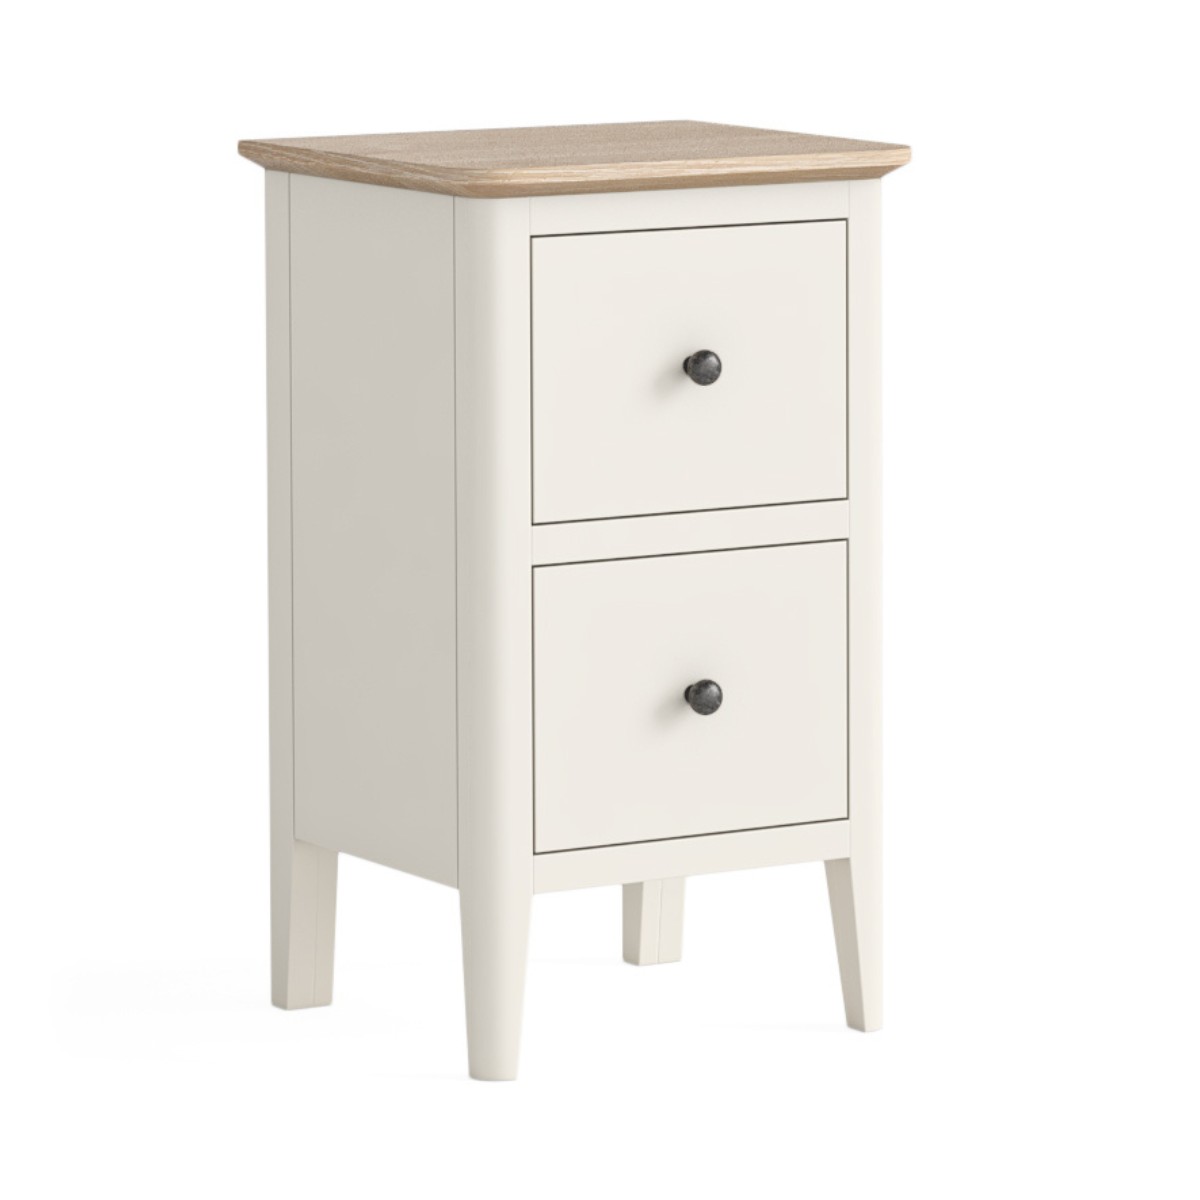 Marcella White Narrow Bedside Table - 1